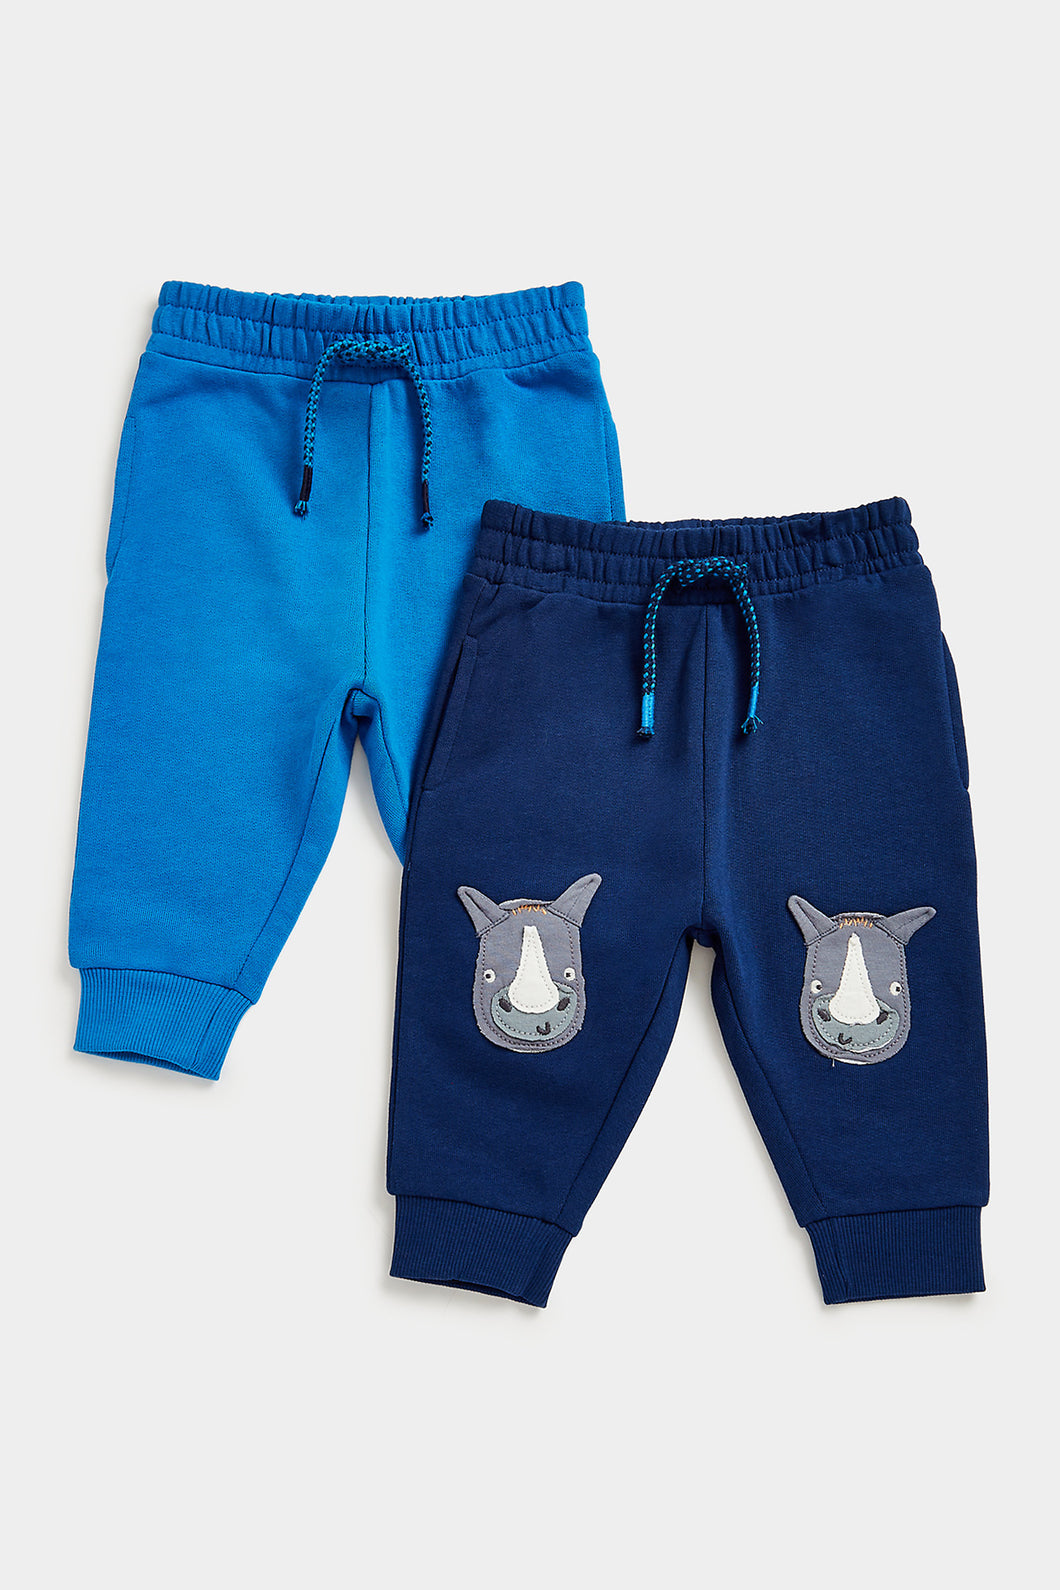 Mothercare Rhino and Blue Joggers - 2 Pack